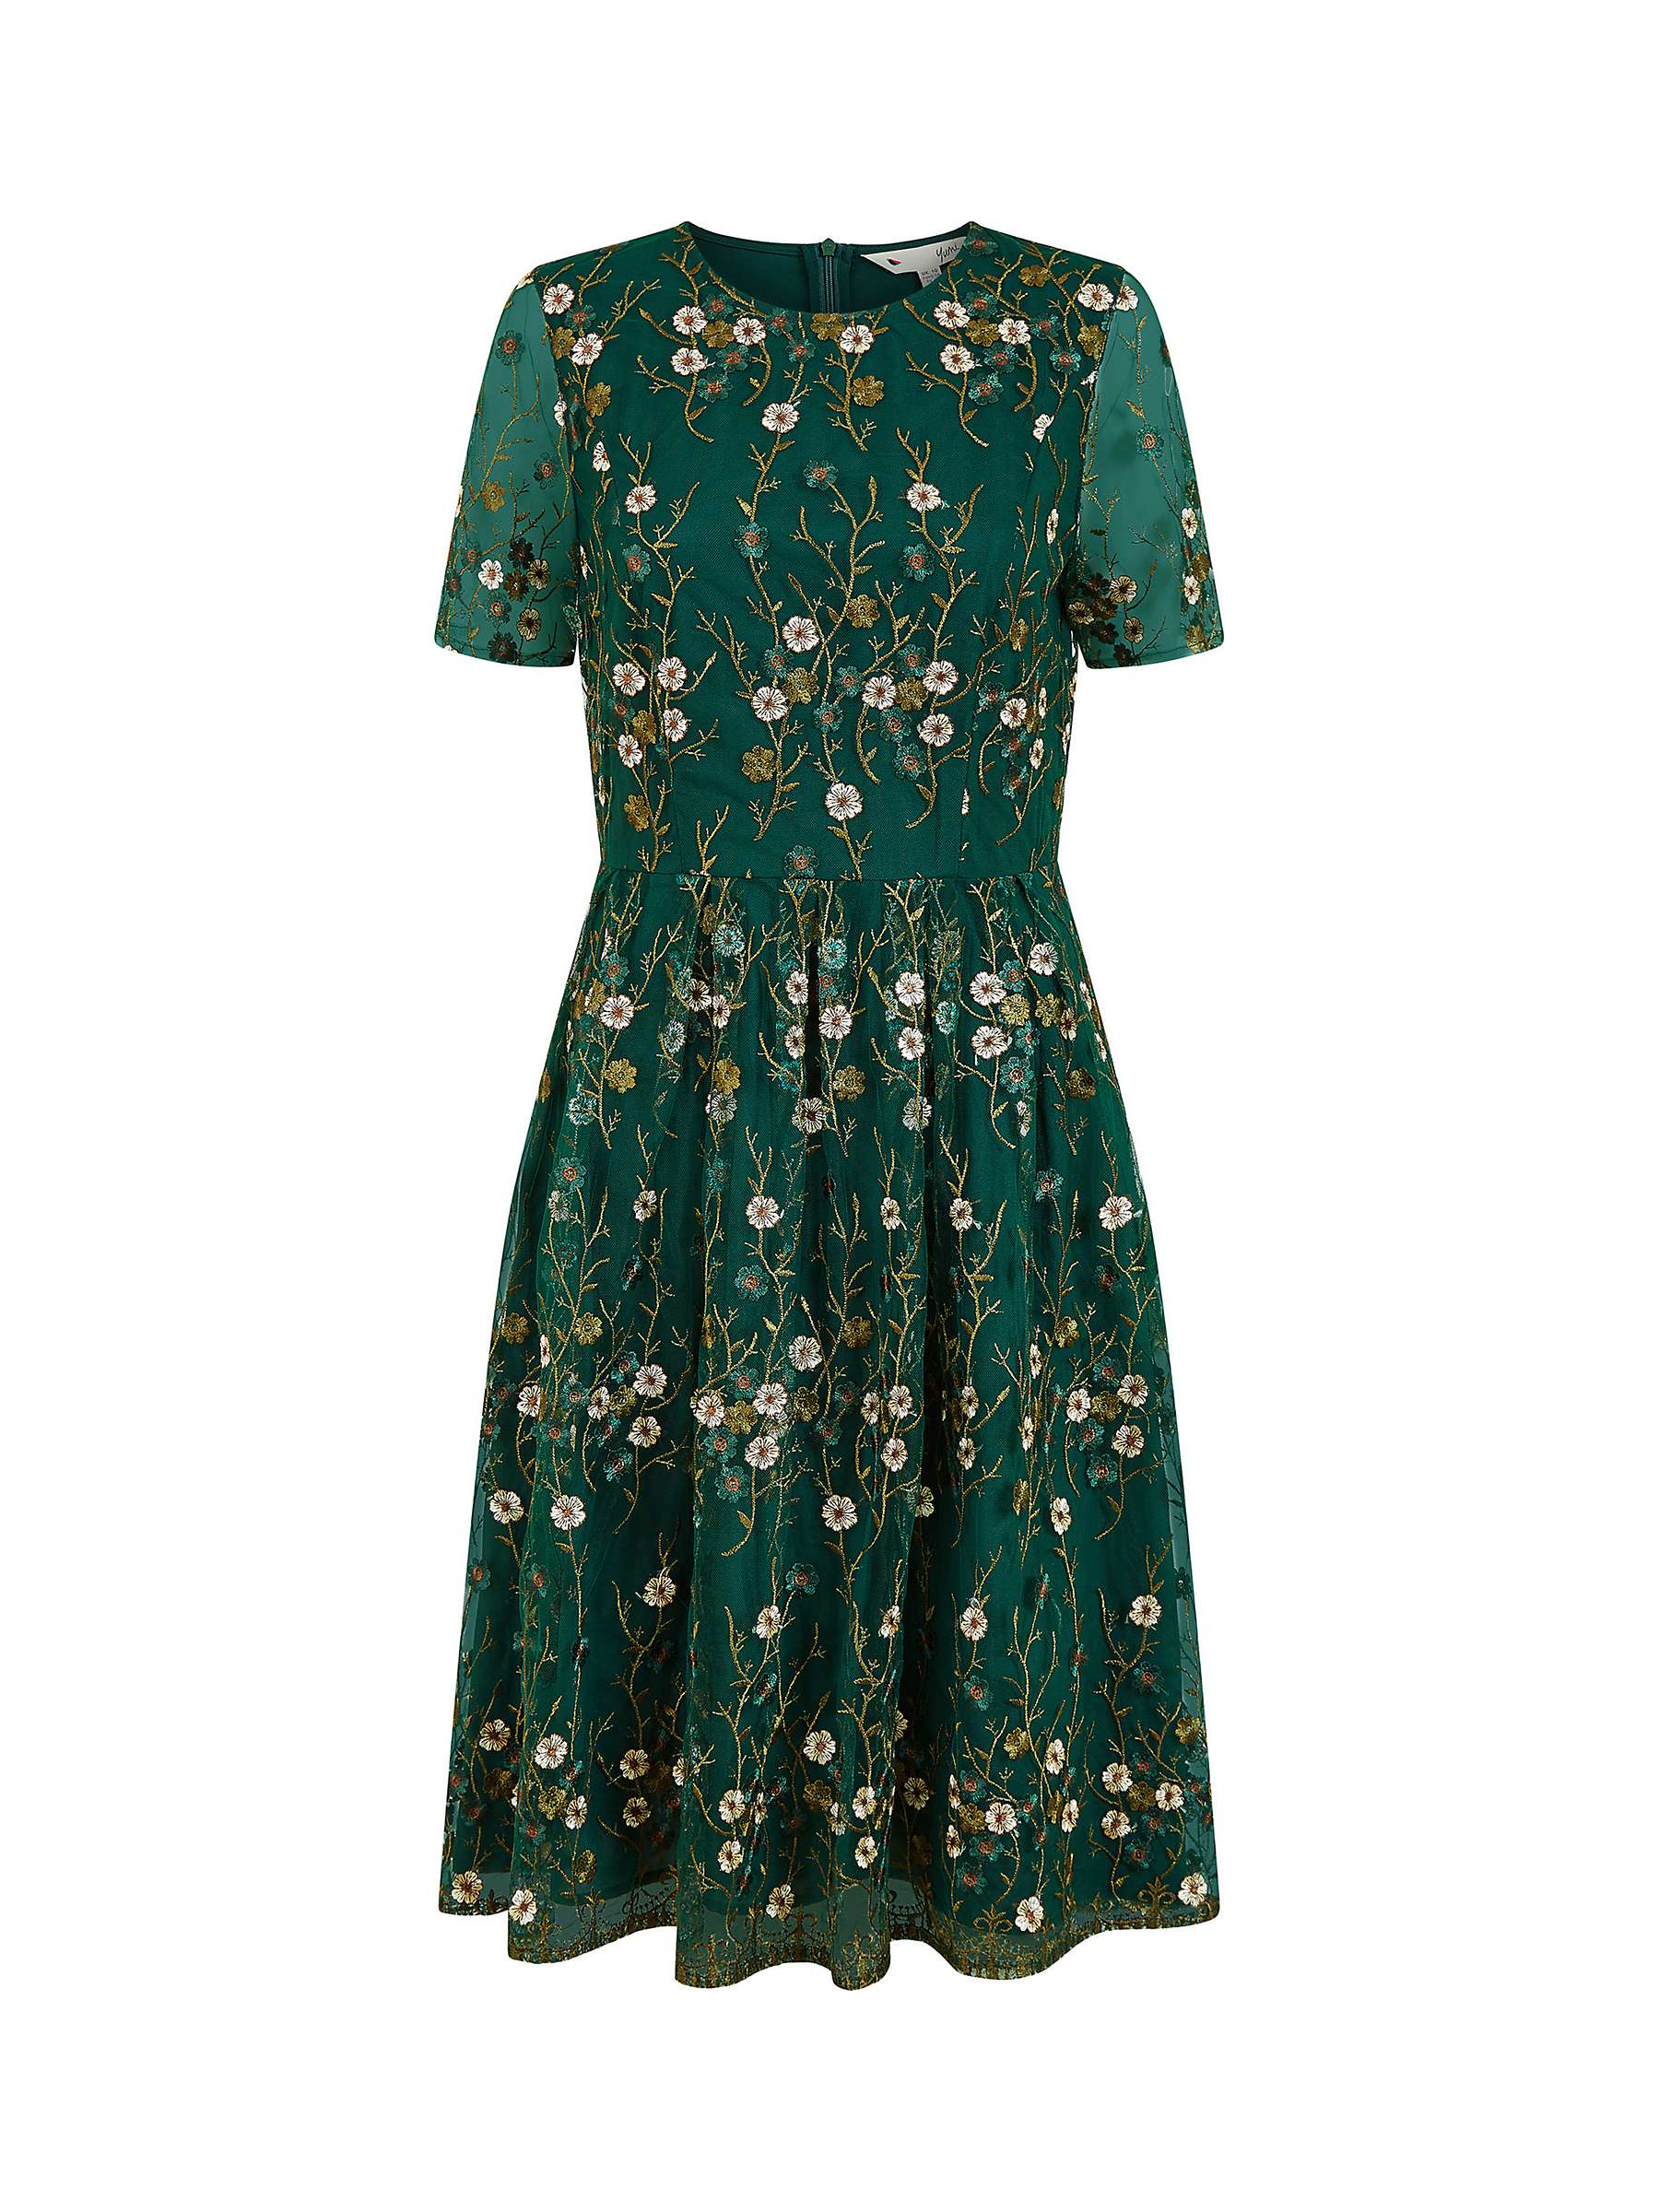 Buy Yumi Embroidered Floral Skater Dress, Green Online at johnlewis.com